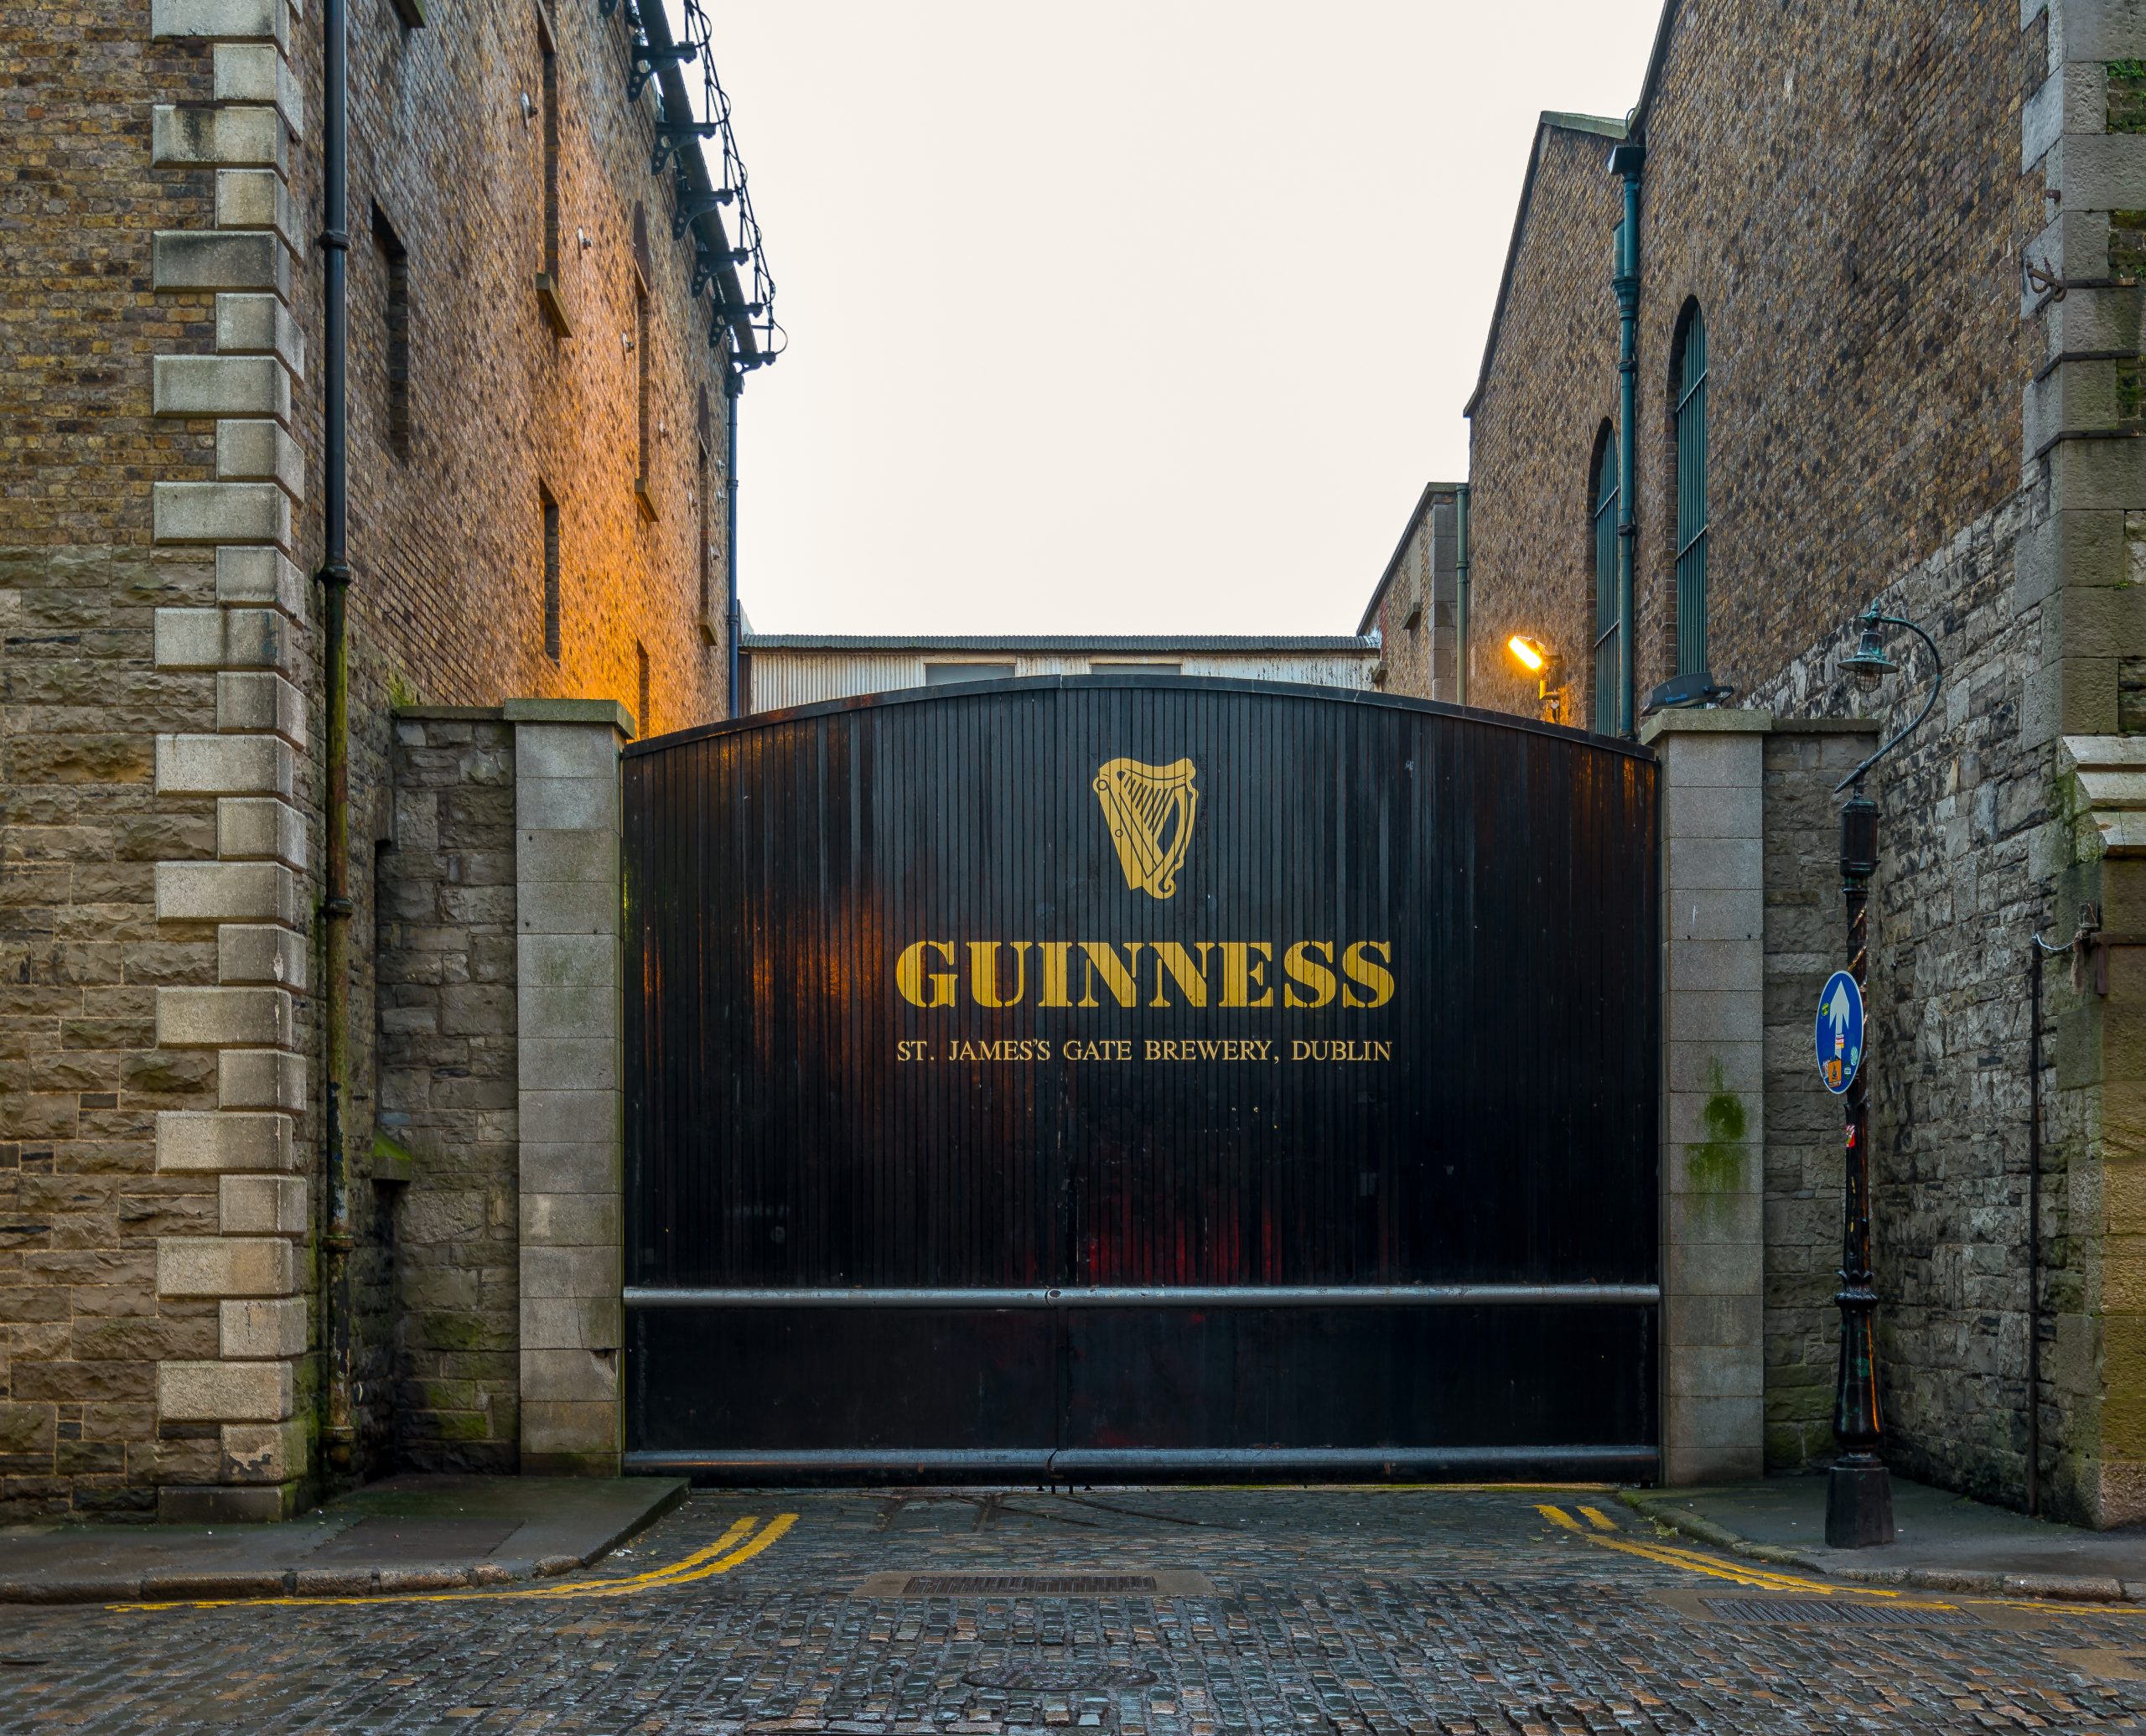 Guinness launches €14m fund to support the recovery of pubs across Ireland